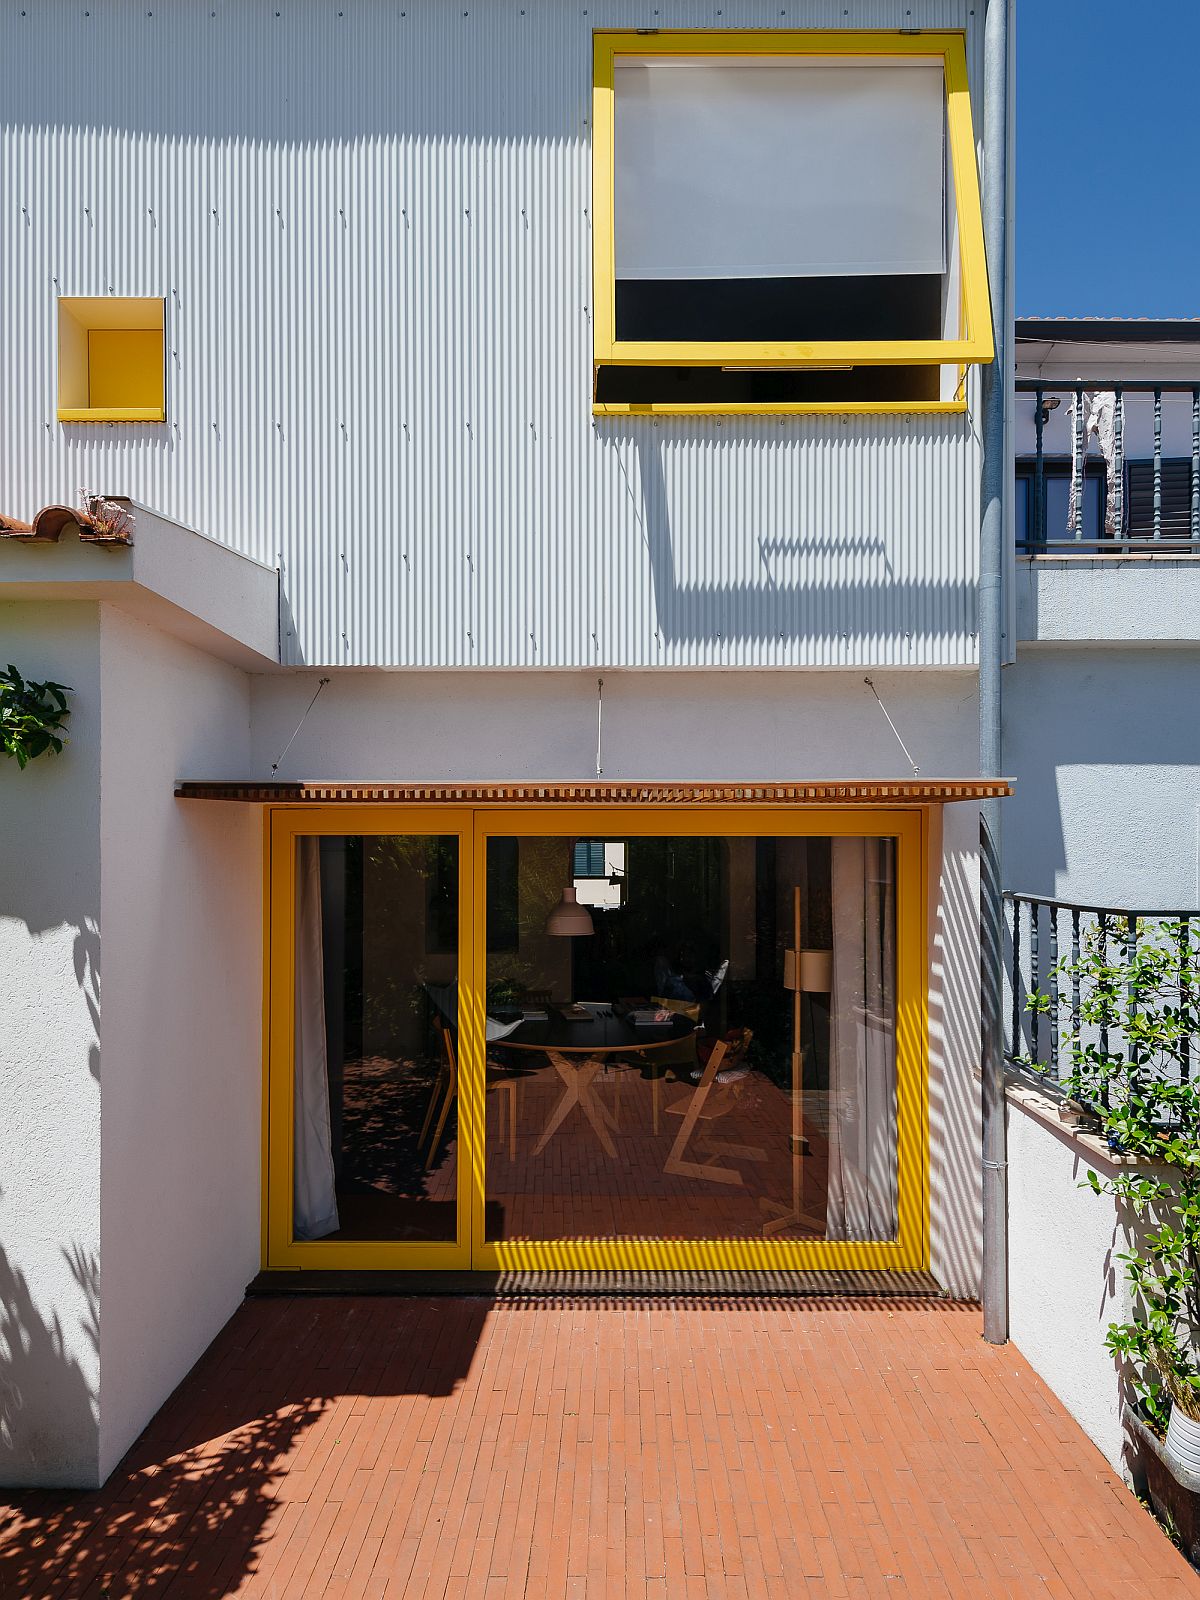 Backyard-of-the-house-is-connected-with-the-interior-using-sliding-glass-doors-that-have-a-bright-yellow-frame-15032